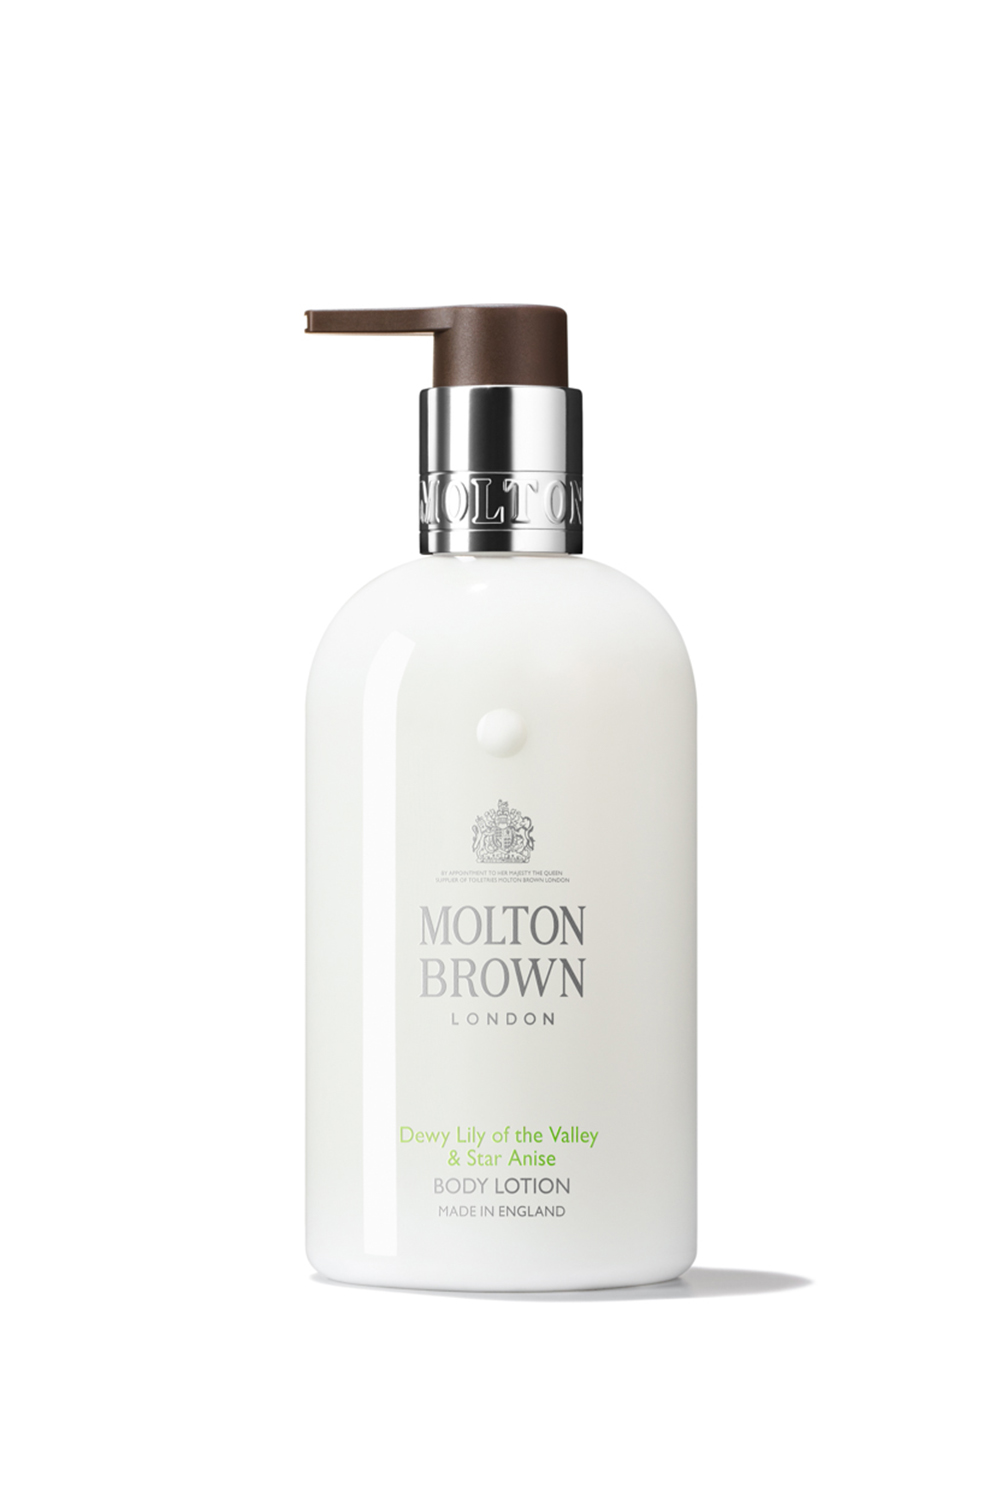 MOLTON BROWN – Κρέμα σώματος Dewy Lily of the Valley & Star Anise- 300ml 1678404.0-0000